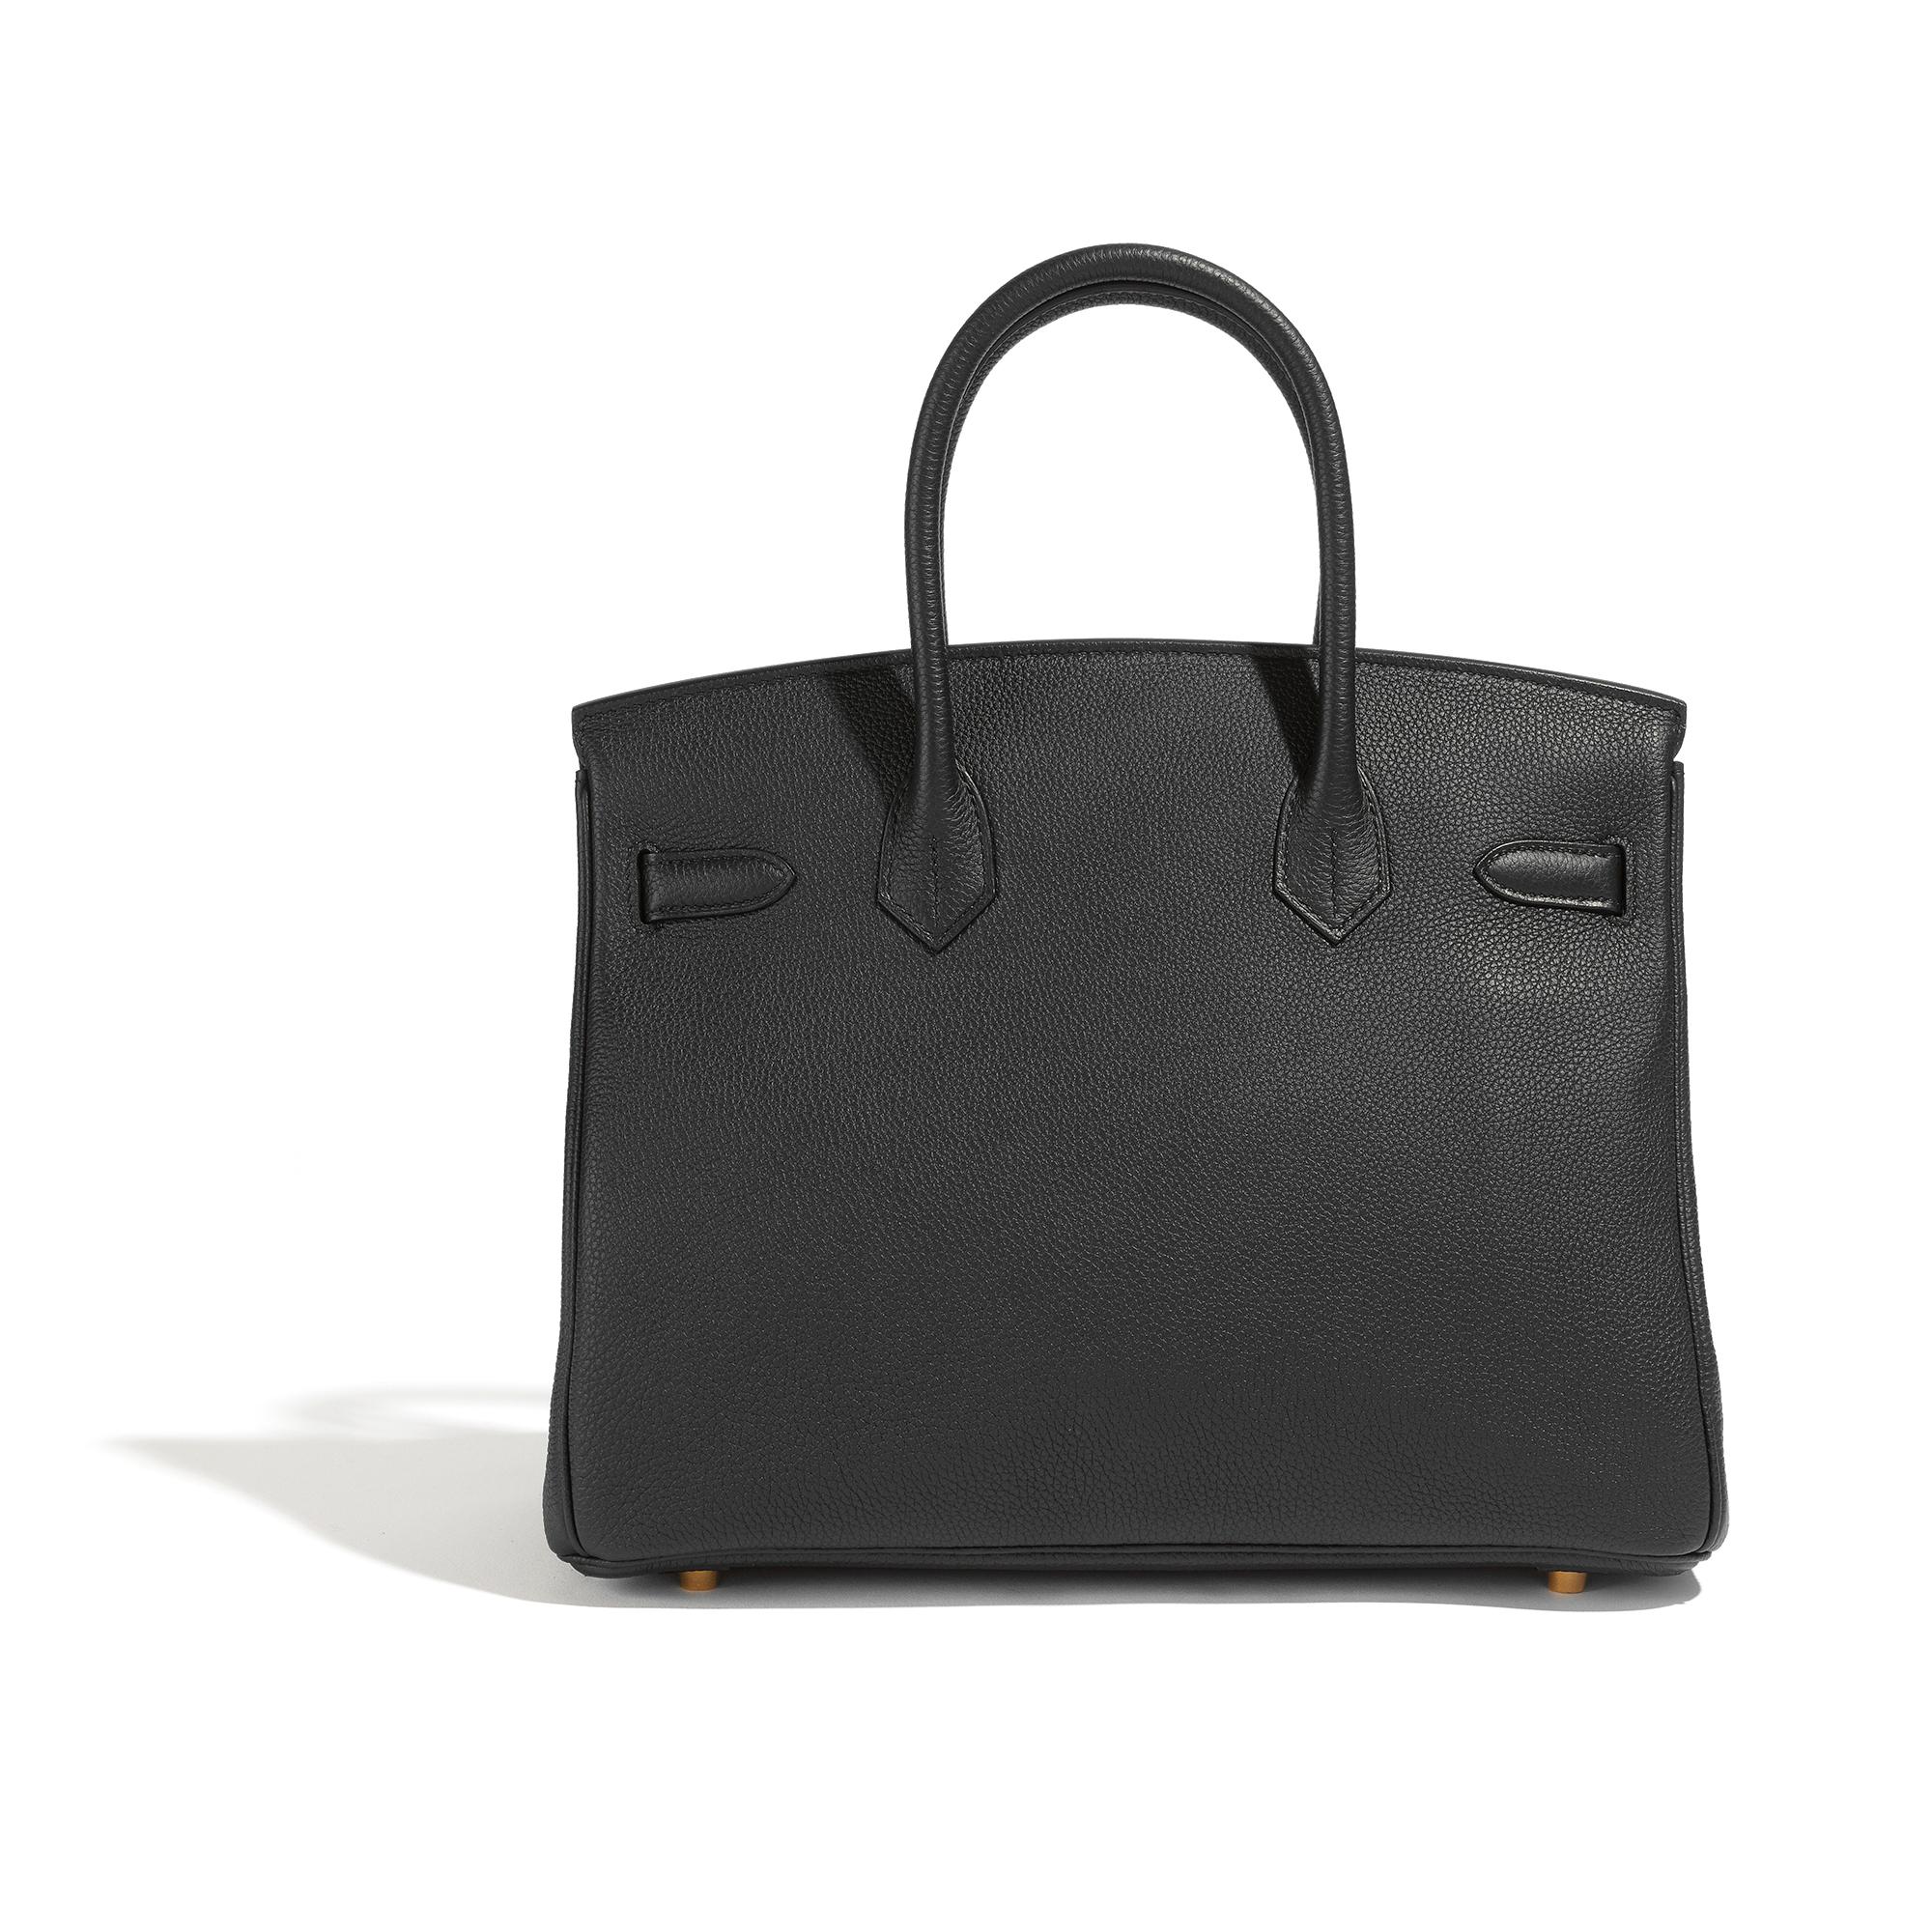 *Hermès Birkin Retourne 30
*Black
*Togo Leather
*Gold hardware
*Serial Number: YHA202BA
*Includes lock and keys
*Includes authentication certificate
*Includes receipt 
*Excellent Condition: This pre-owned item contains few signs of wear, including